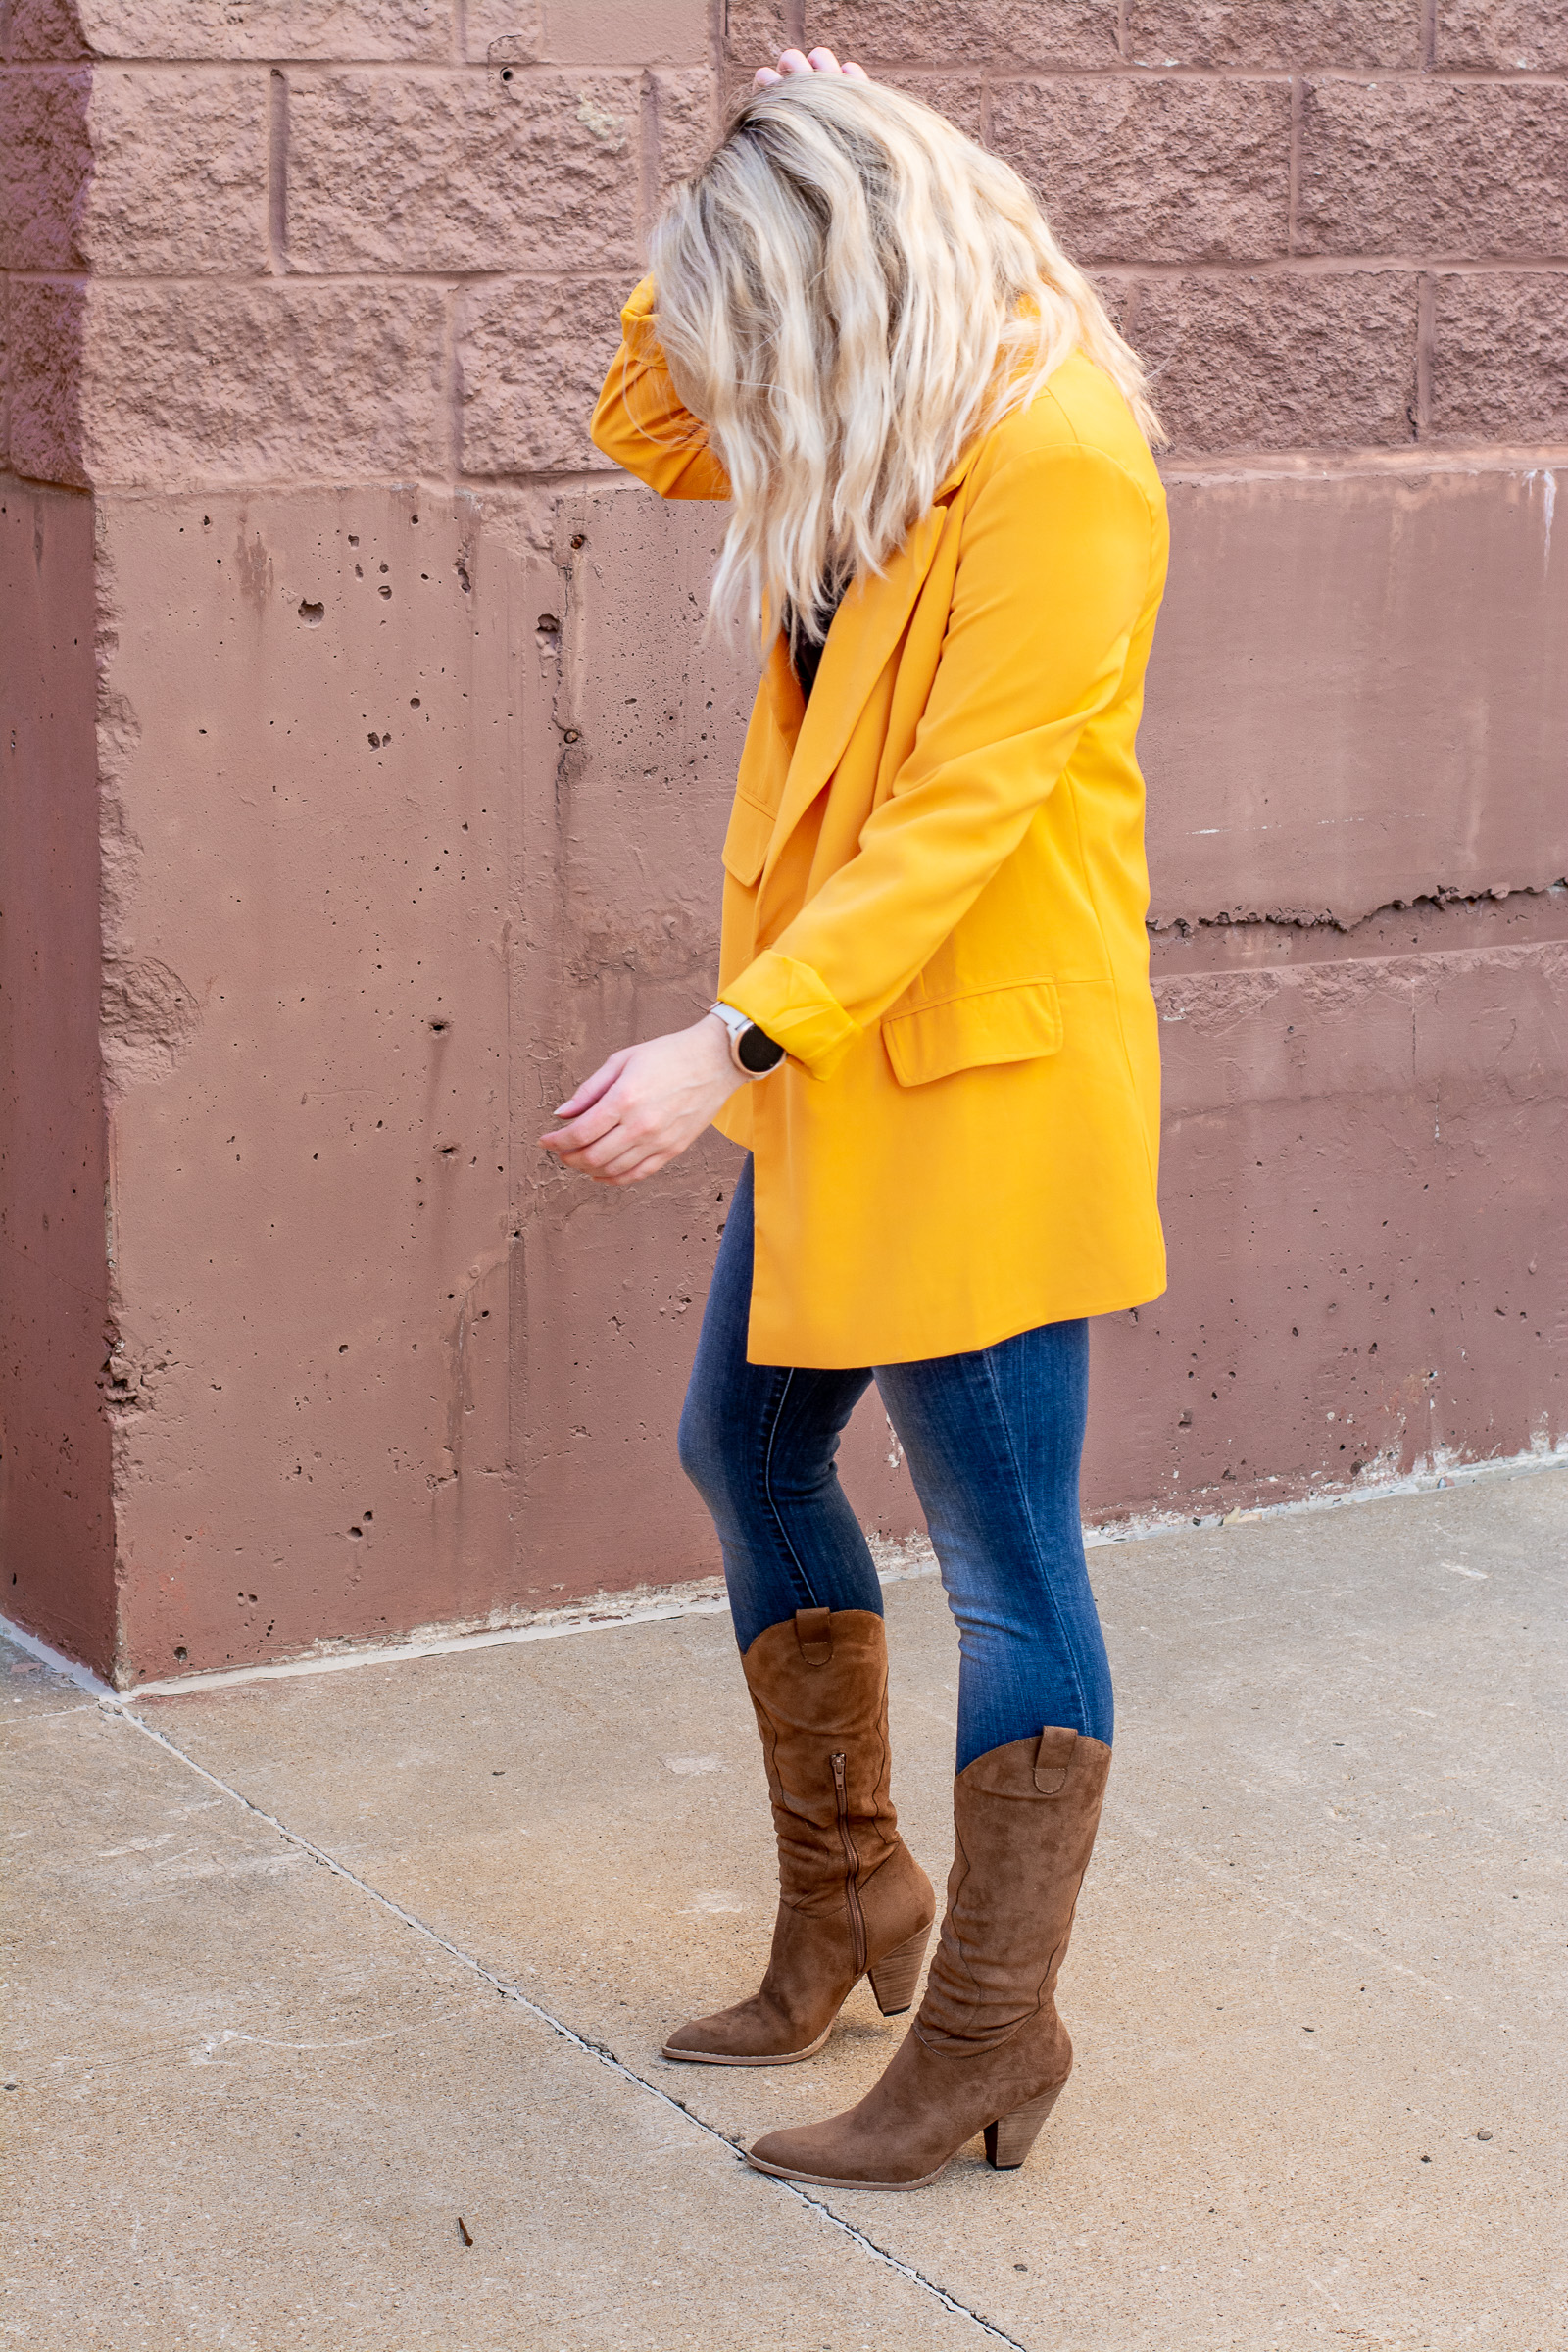 Fall Outfit: Mustard Blazer + Western Boots. | LSR